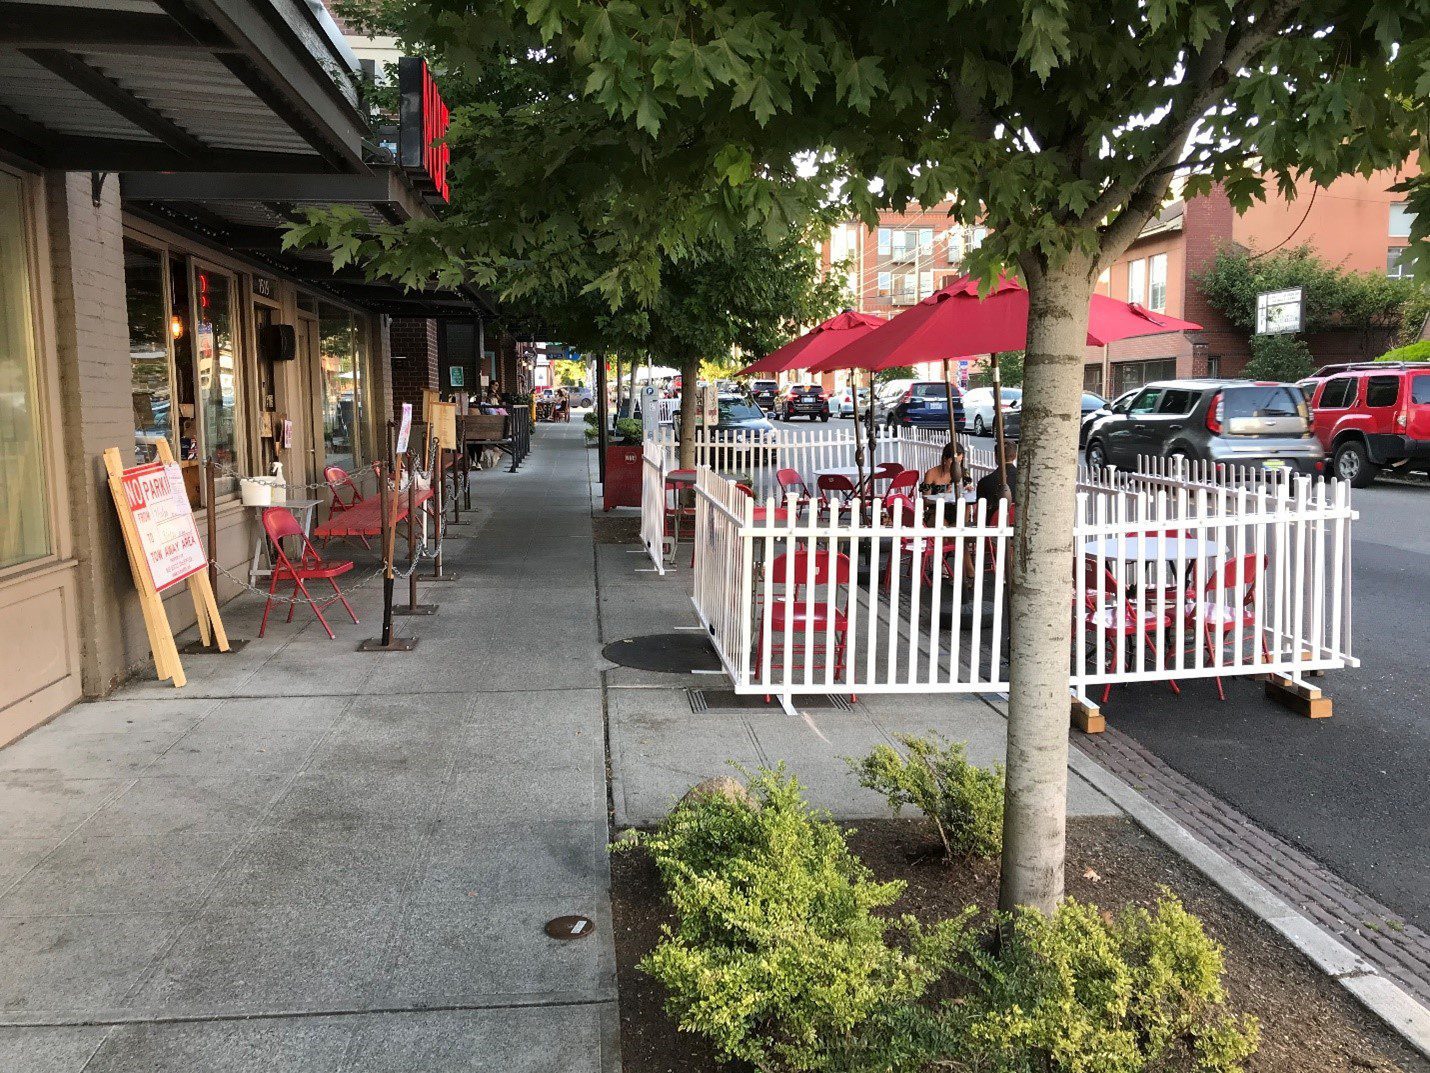 An outdoor dining area at NUE, a restaurant in Seattle's Capitol Hill neighborhood. A fenced eating area with red sun umbrellas is visible in the middle of the photo, with parked cars and buildings visible in the background.An outdoor dining area at NUE, a restaurant in Seattle’s Capitol Hill neighborhood. 